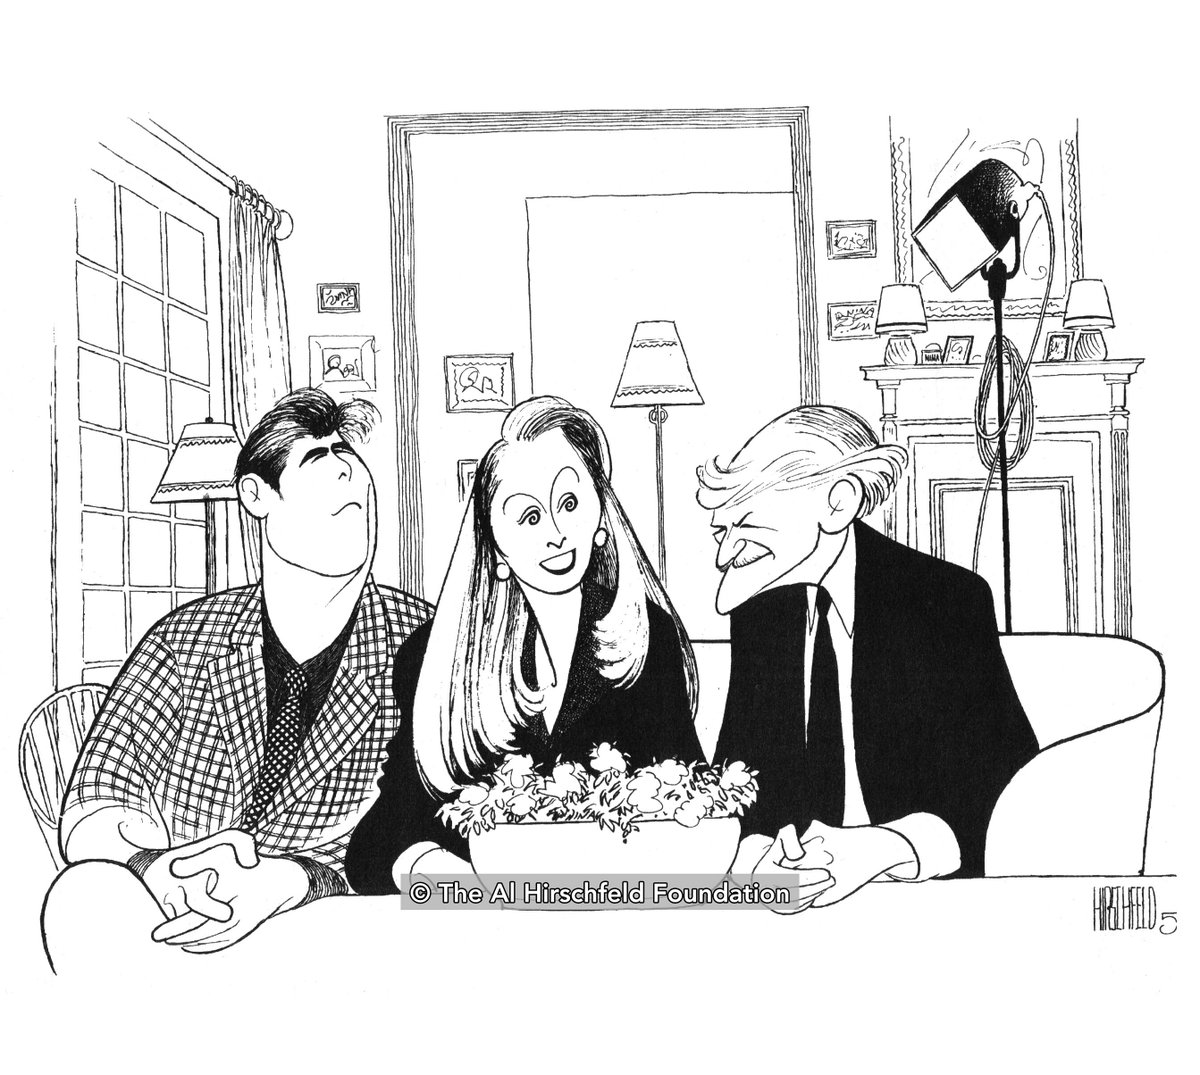 #OTD An American Daughter with Peter Riegert, Kate Nelligan, and Hal Holbrook, 1997

#Hirschfeld #Art #Theater #HalHolbrook #KateNelligan #PeterRiegert #Drawing